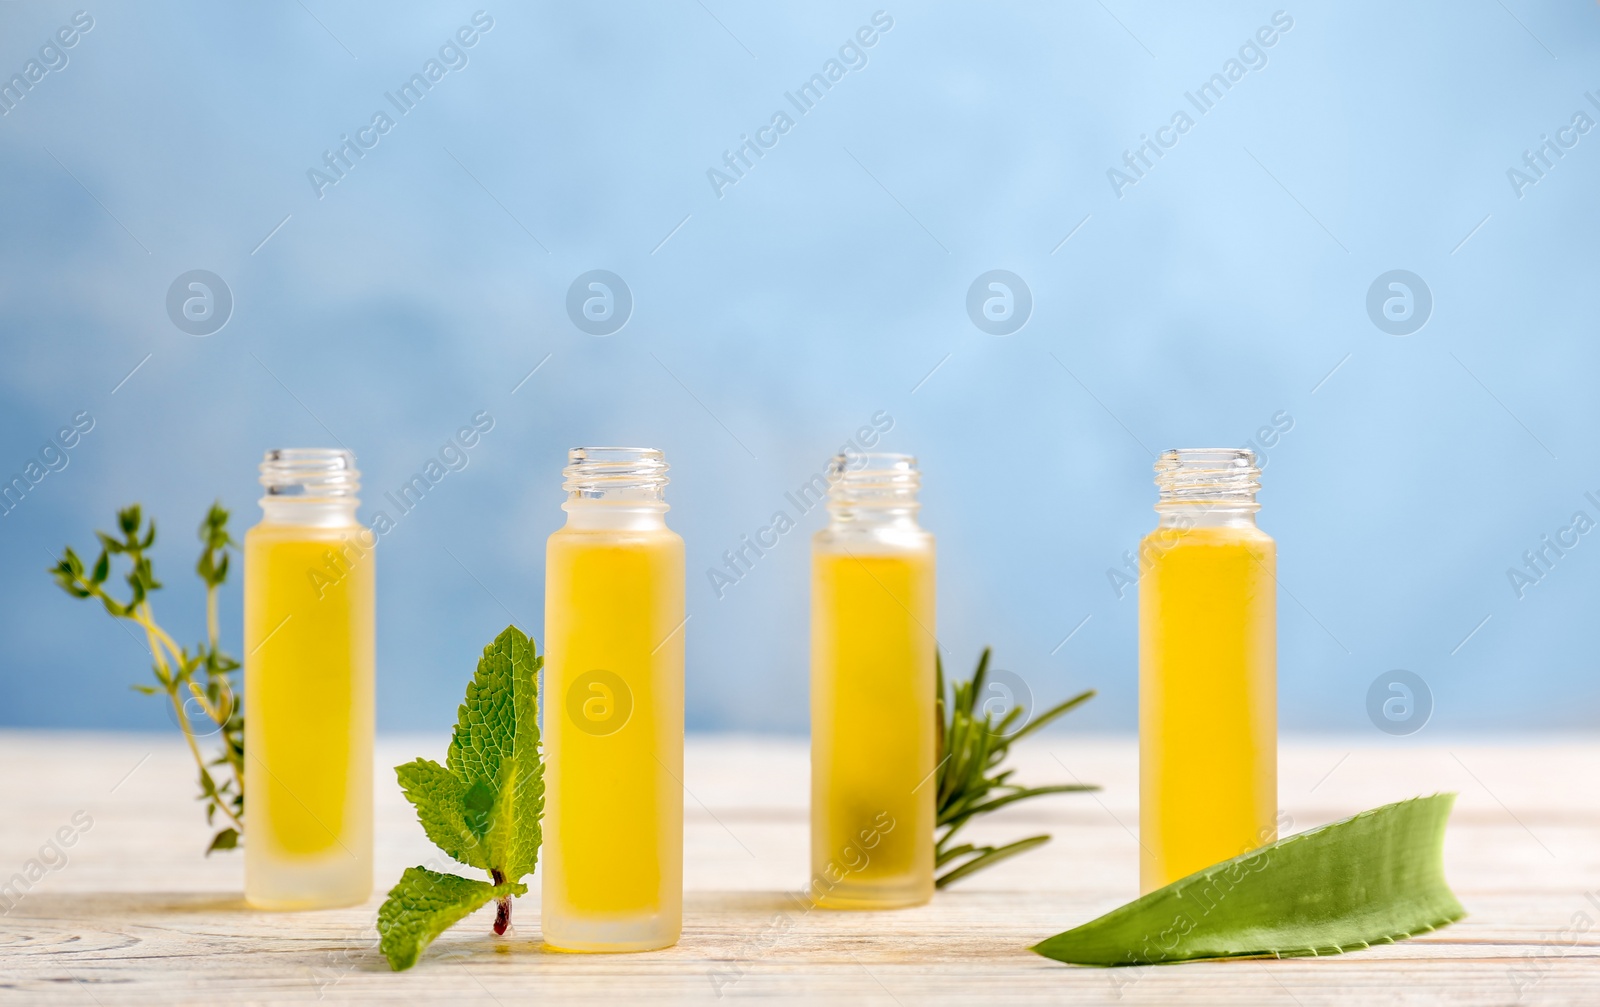 Photo of Bottles with essential oils and fresh herbs on table